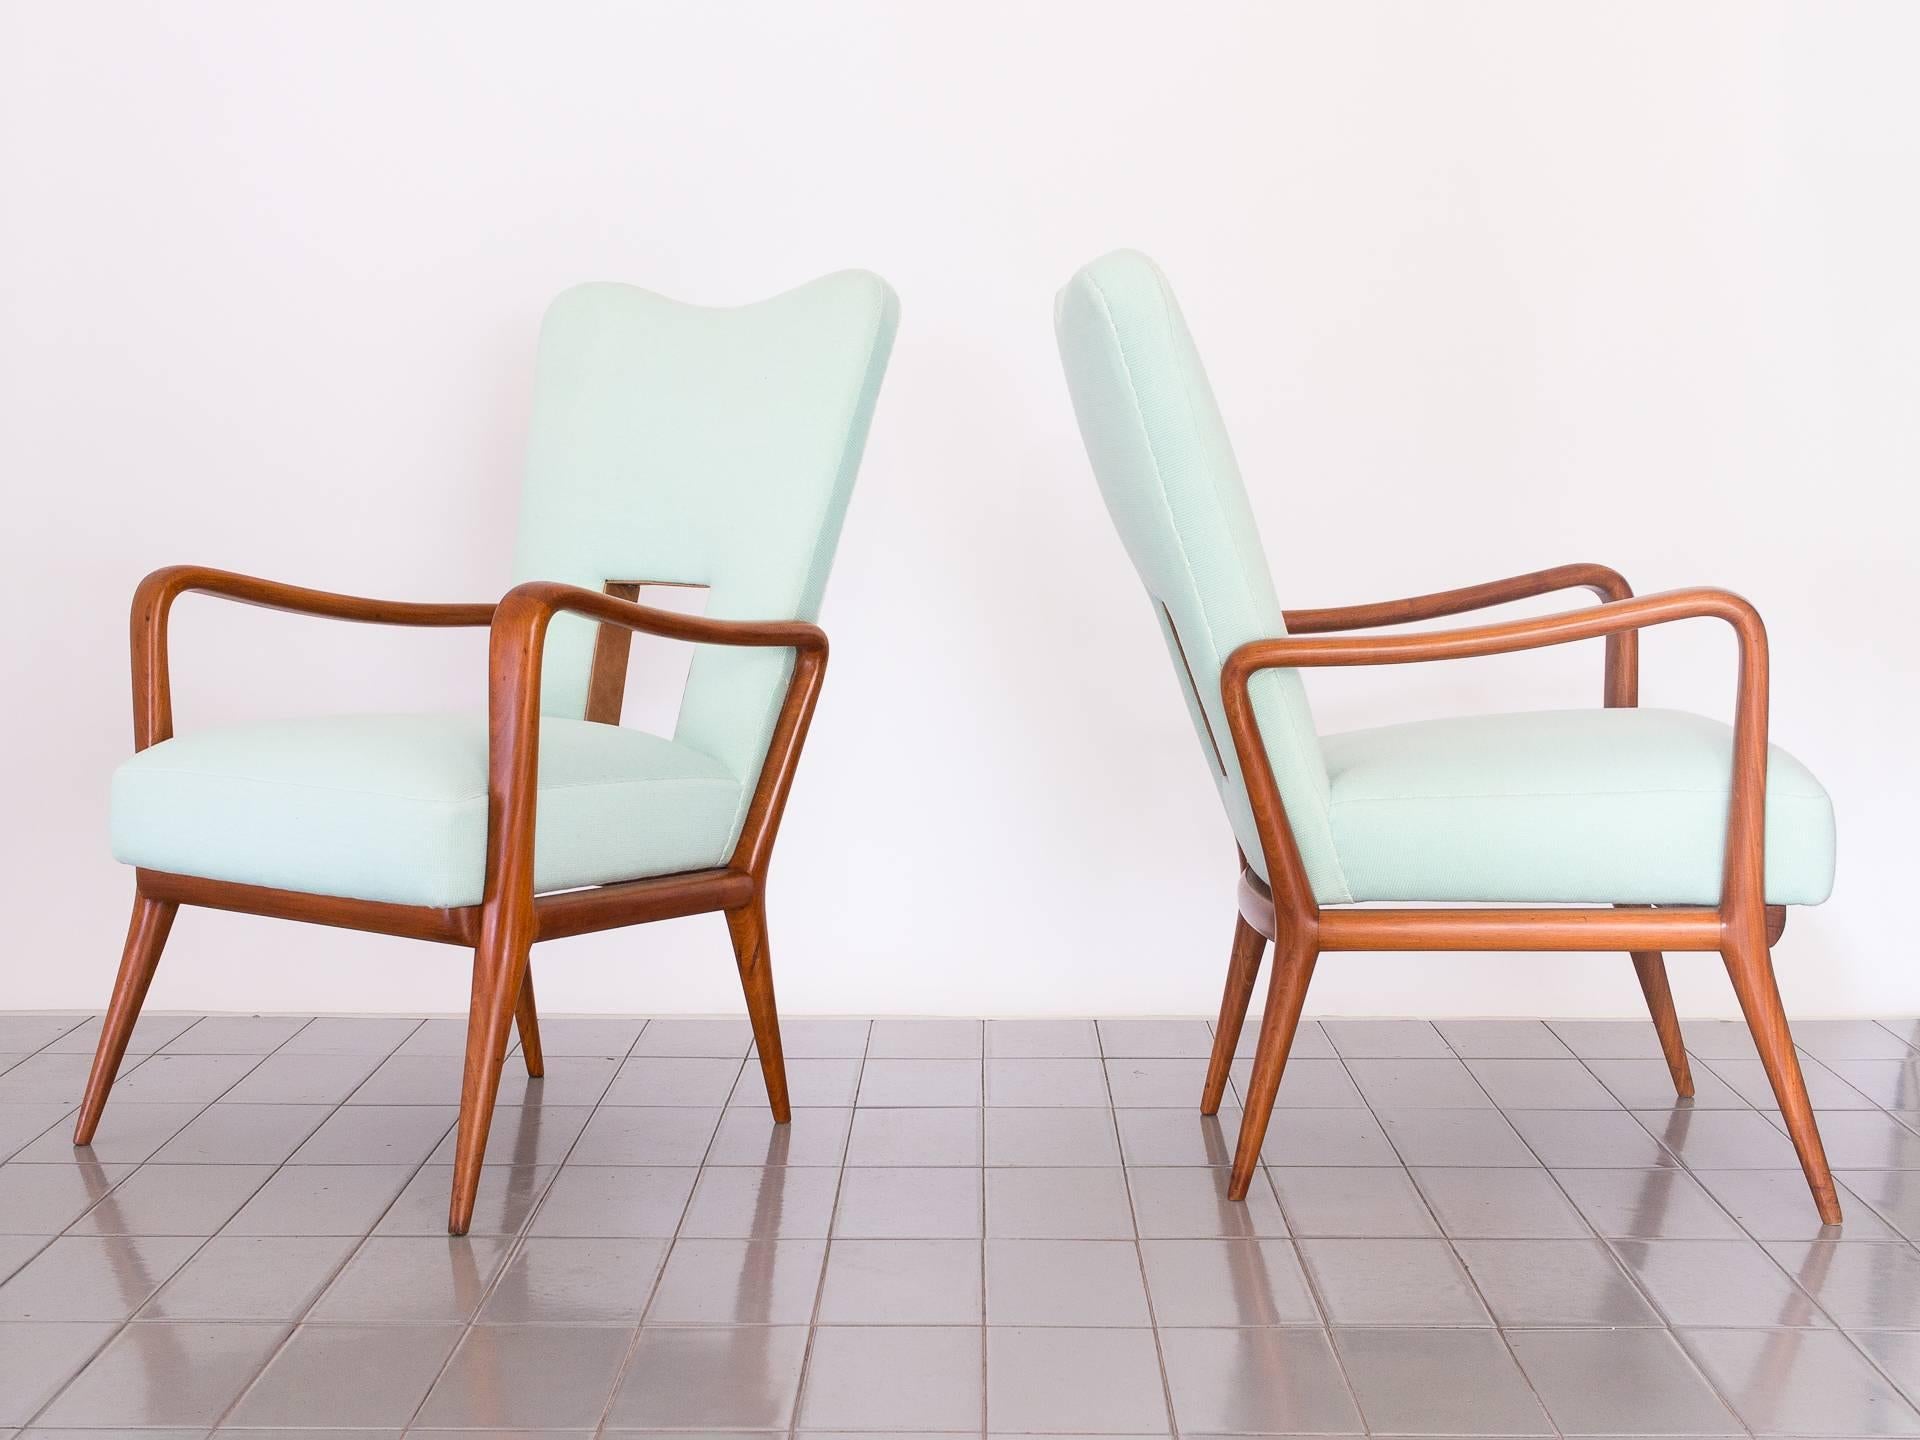 These exquisite chairs were produced in São Paulo Brazil in the 1950s by Luiz Pássaro, one of the best woodworkers from the period. Their elegance and craftsmanship quality are beyond standards, and their uniqueness surely Stand apart. Luiz Pássaro